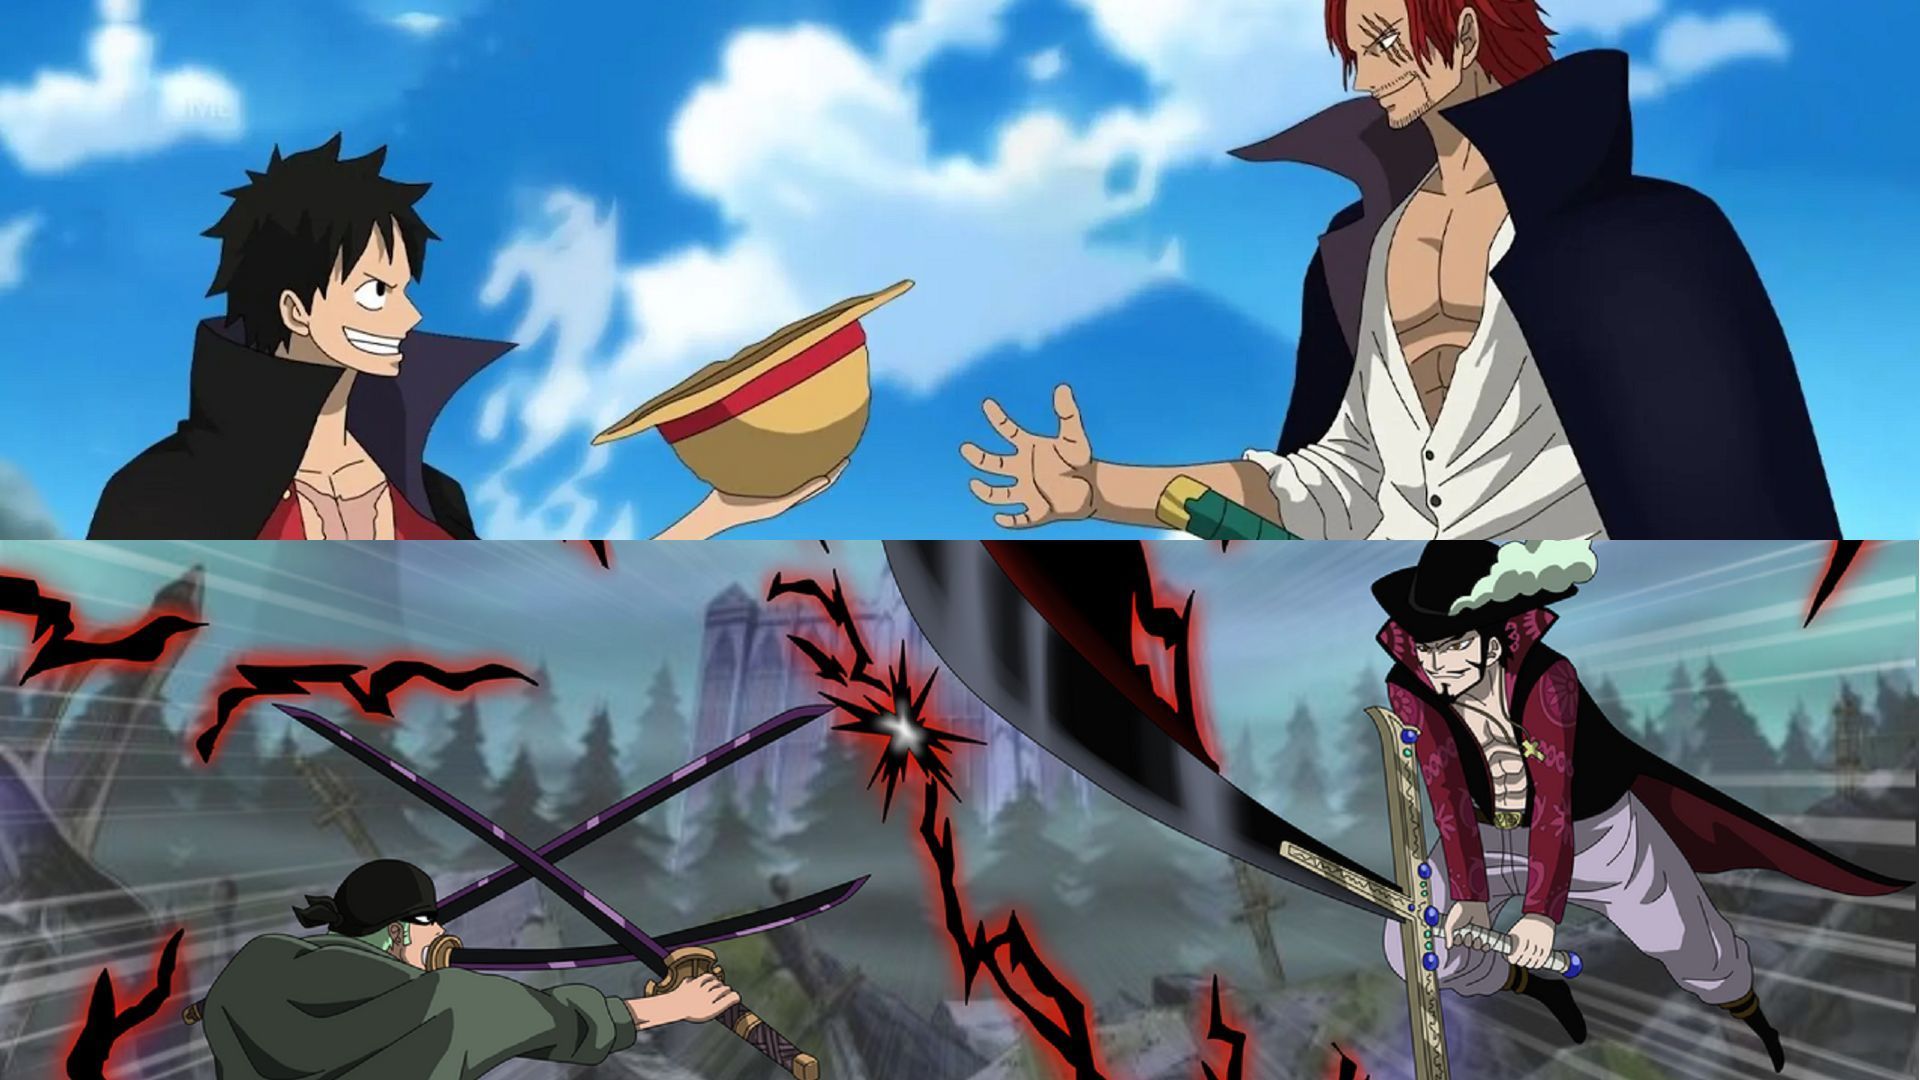 The fates of Shanks and Mihawk are intertwined with those of Luffy&#039;s and Zoro&#039;s (Image via Eiichiro Oda/Shueisha, One Piece)